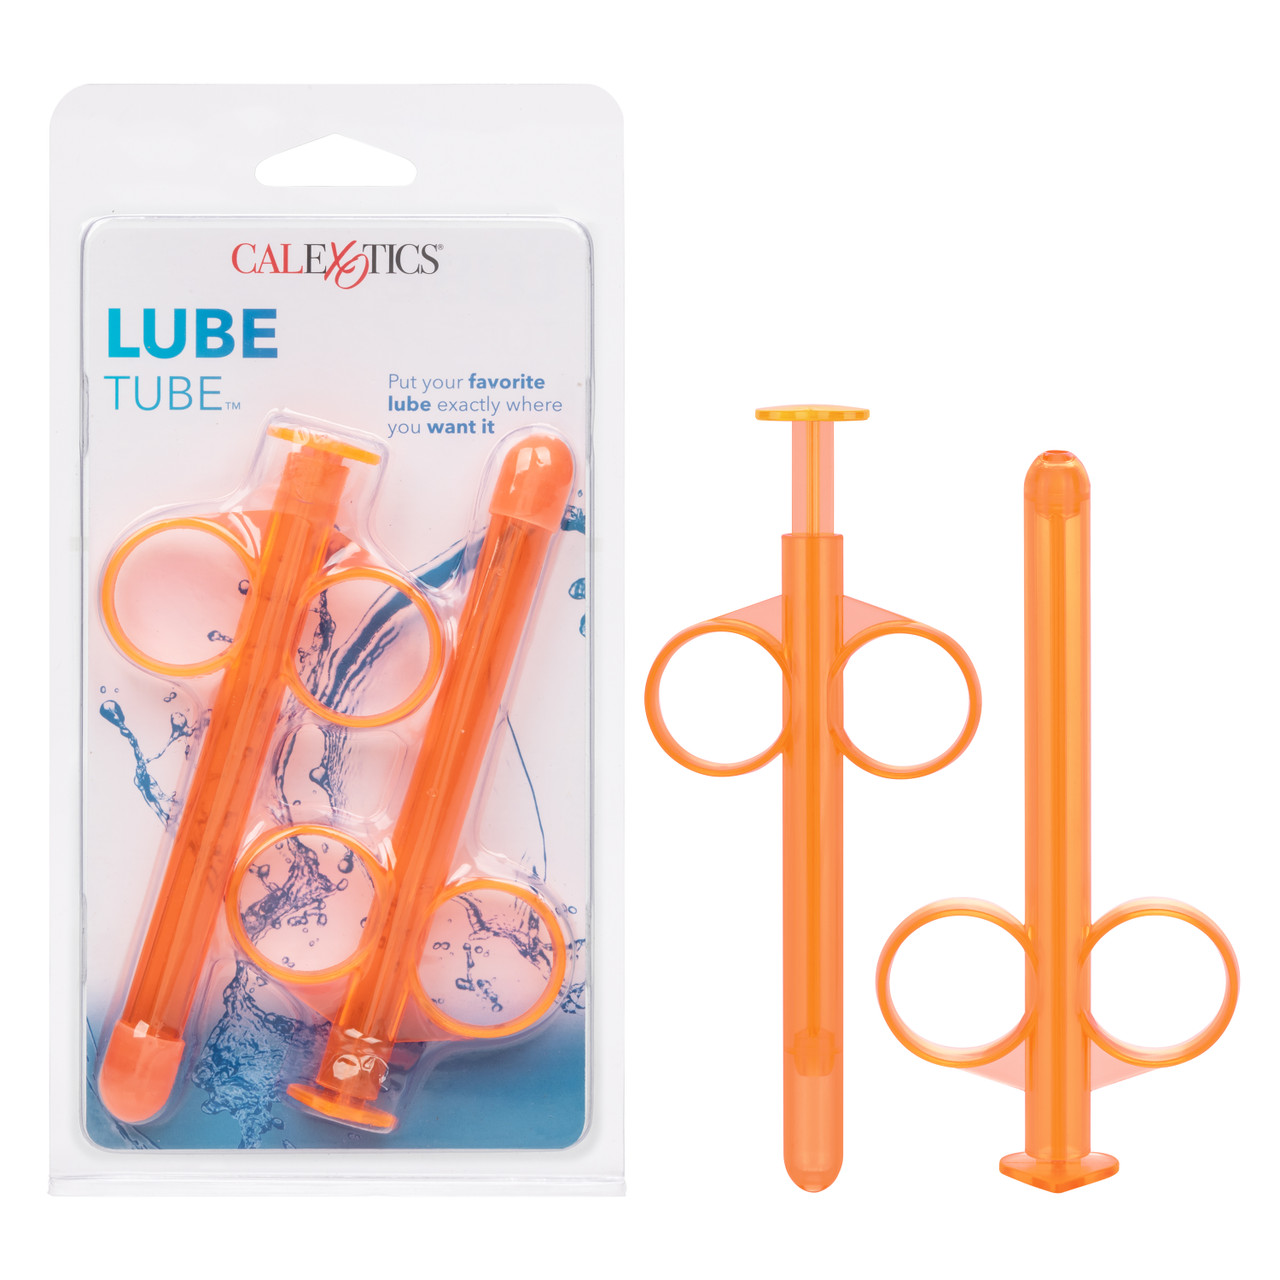 ara venise ocampo recommends lube your tube com pic